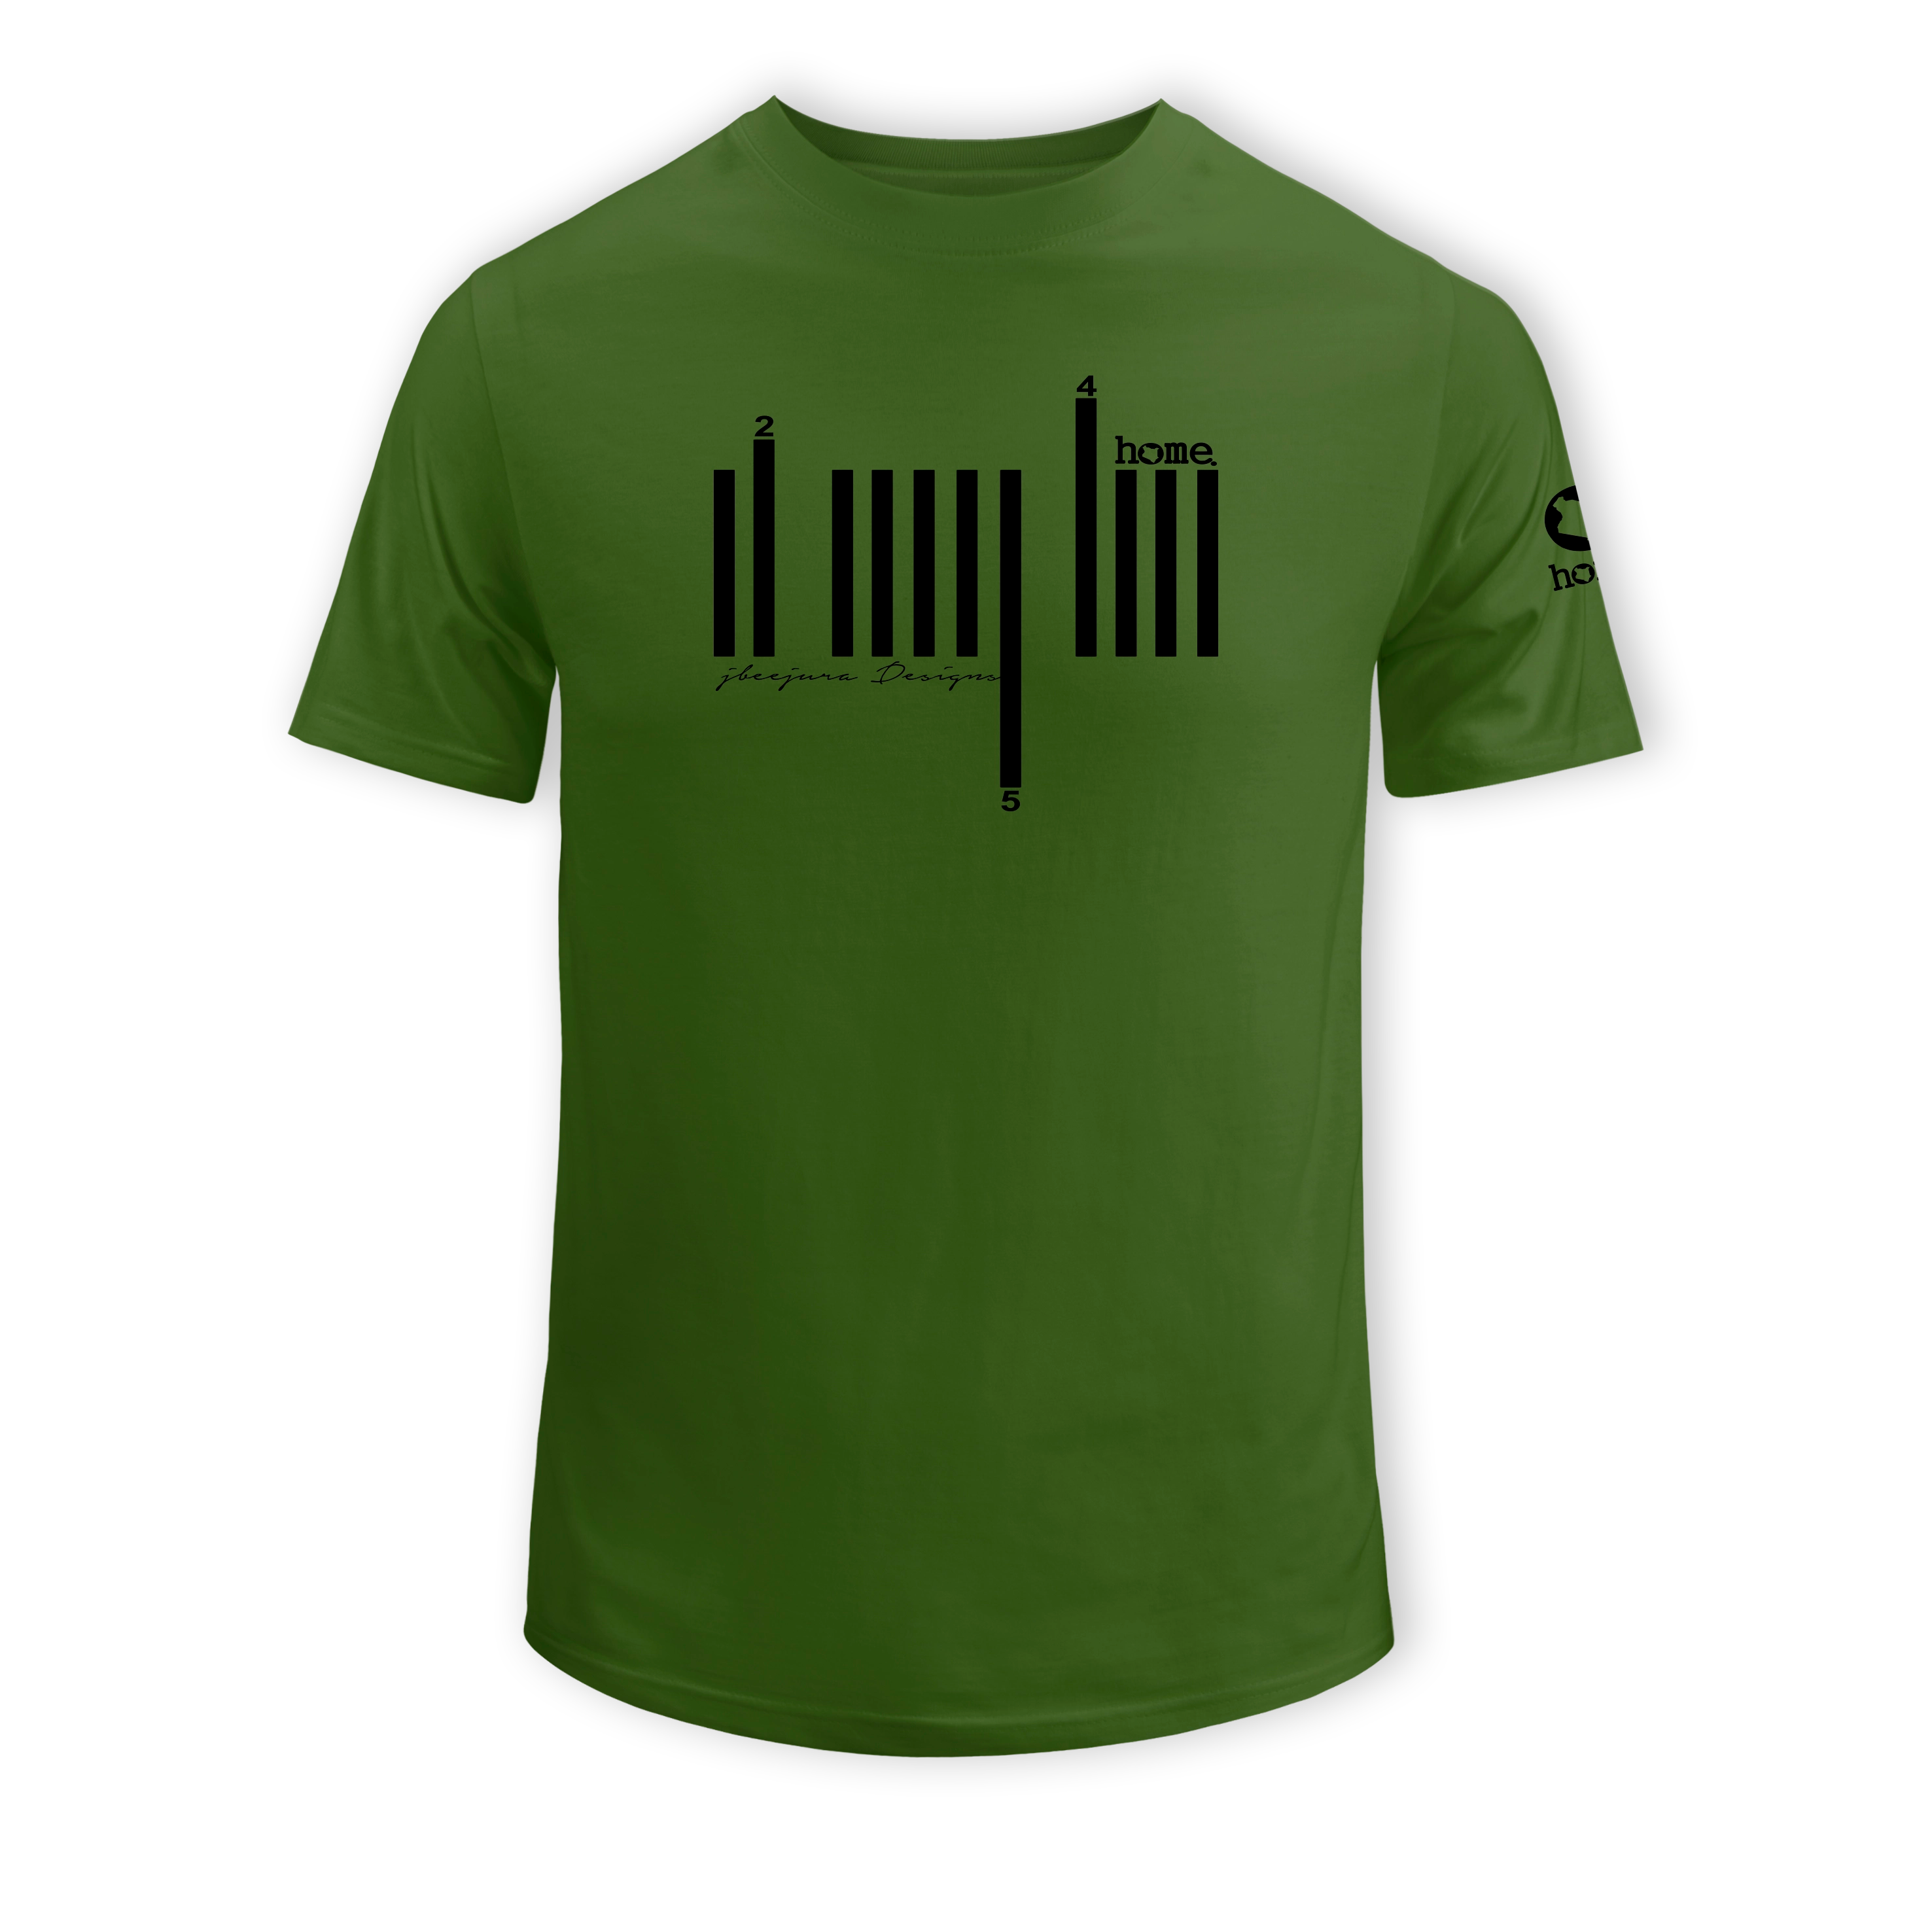 home_254 SHORT-SLEEVED JUNGLE GREEN T-SHIRT WITH A BLACK BARS PRINT – COTTON PLUS FABRIC